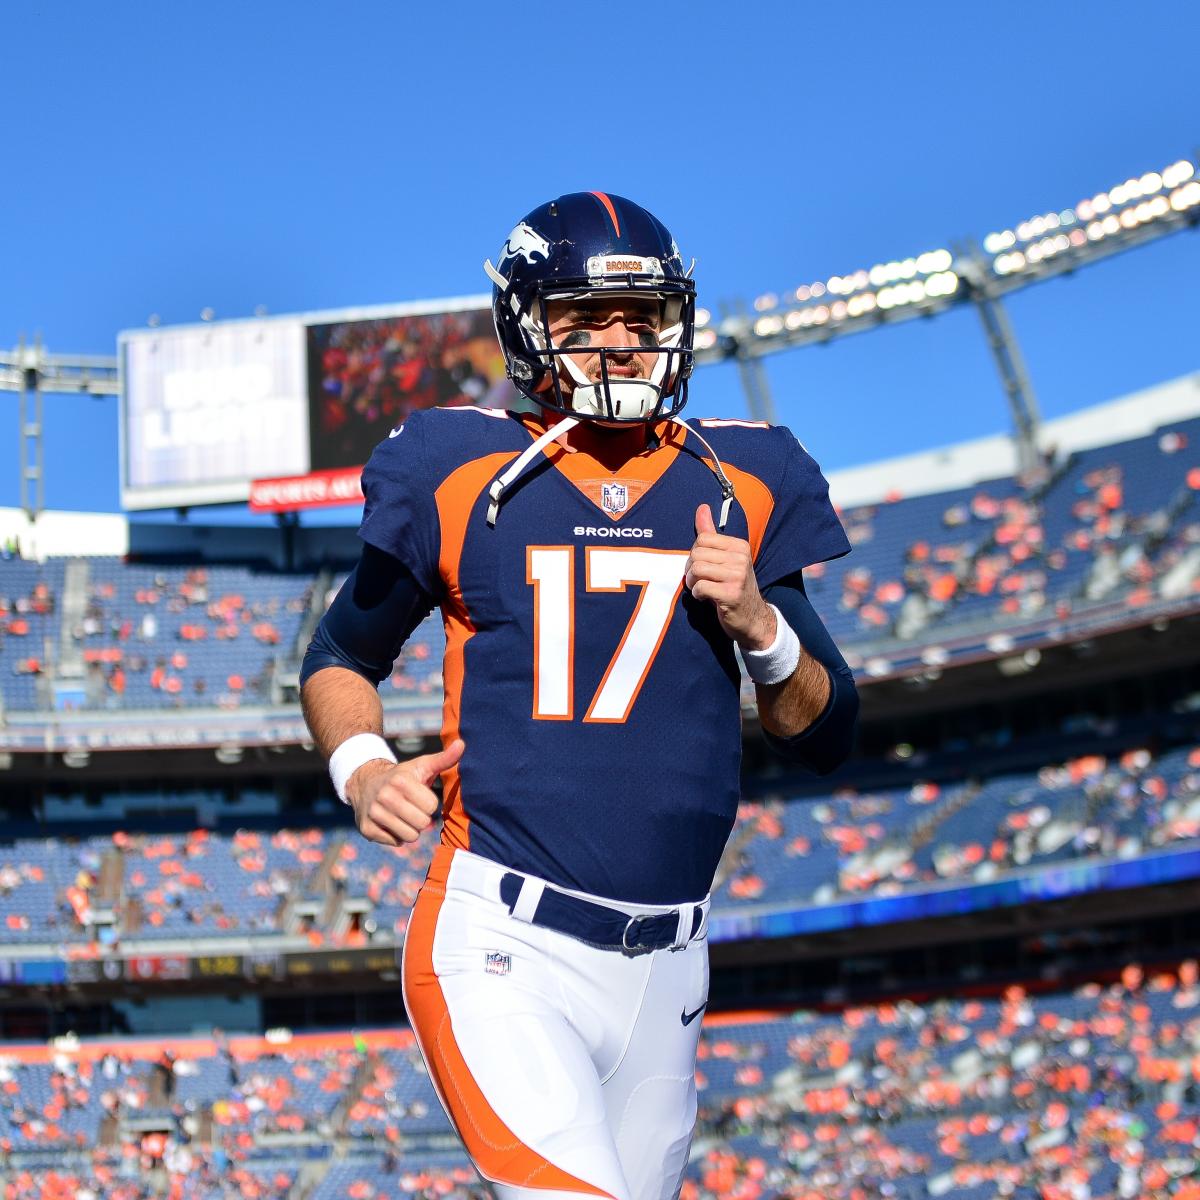 former-broncos-texans-qb-brock-osweiler-retires-from-nfl-at-age-28